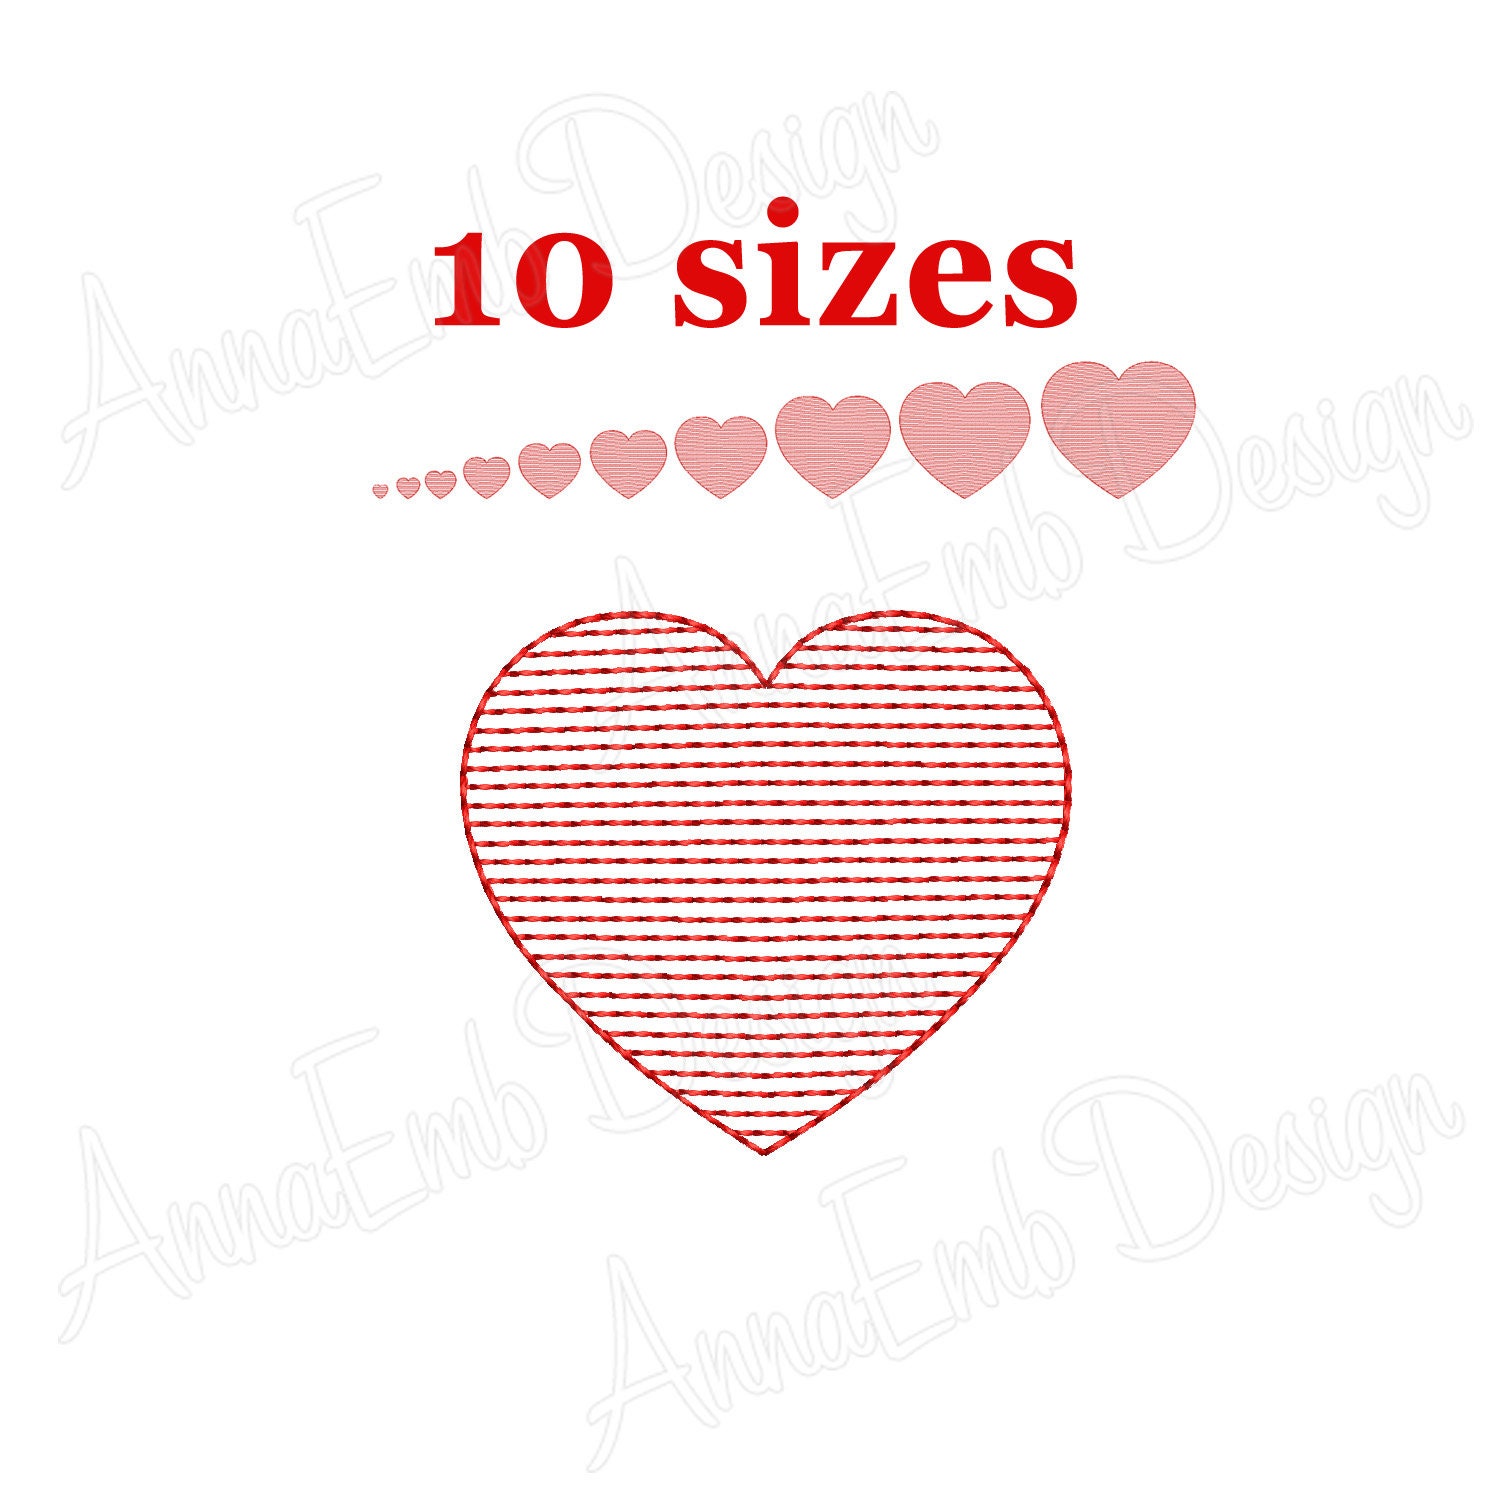 FREE Heart Drawing Template - Download in Word, PDF, Illustrator,  Photoshop, EPS, SVG, JPG, GIF, PNG | Template.net